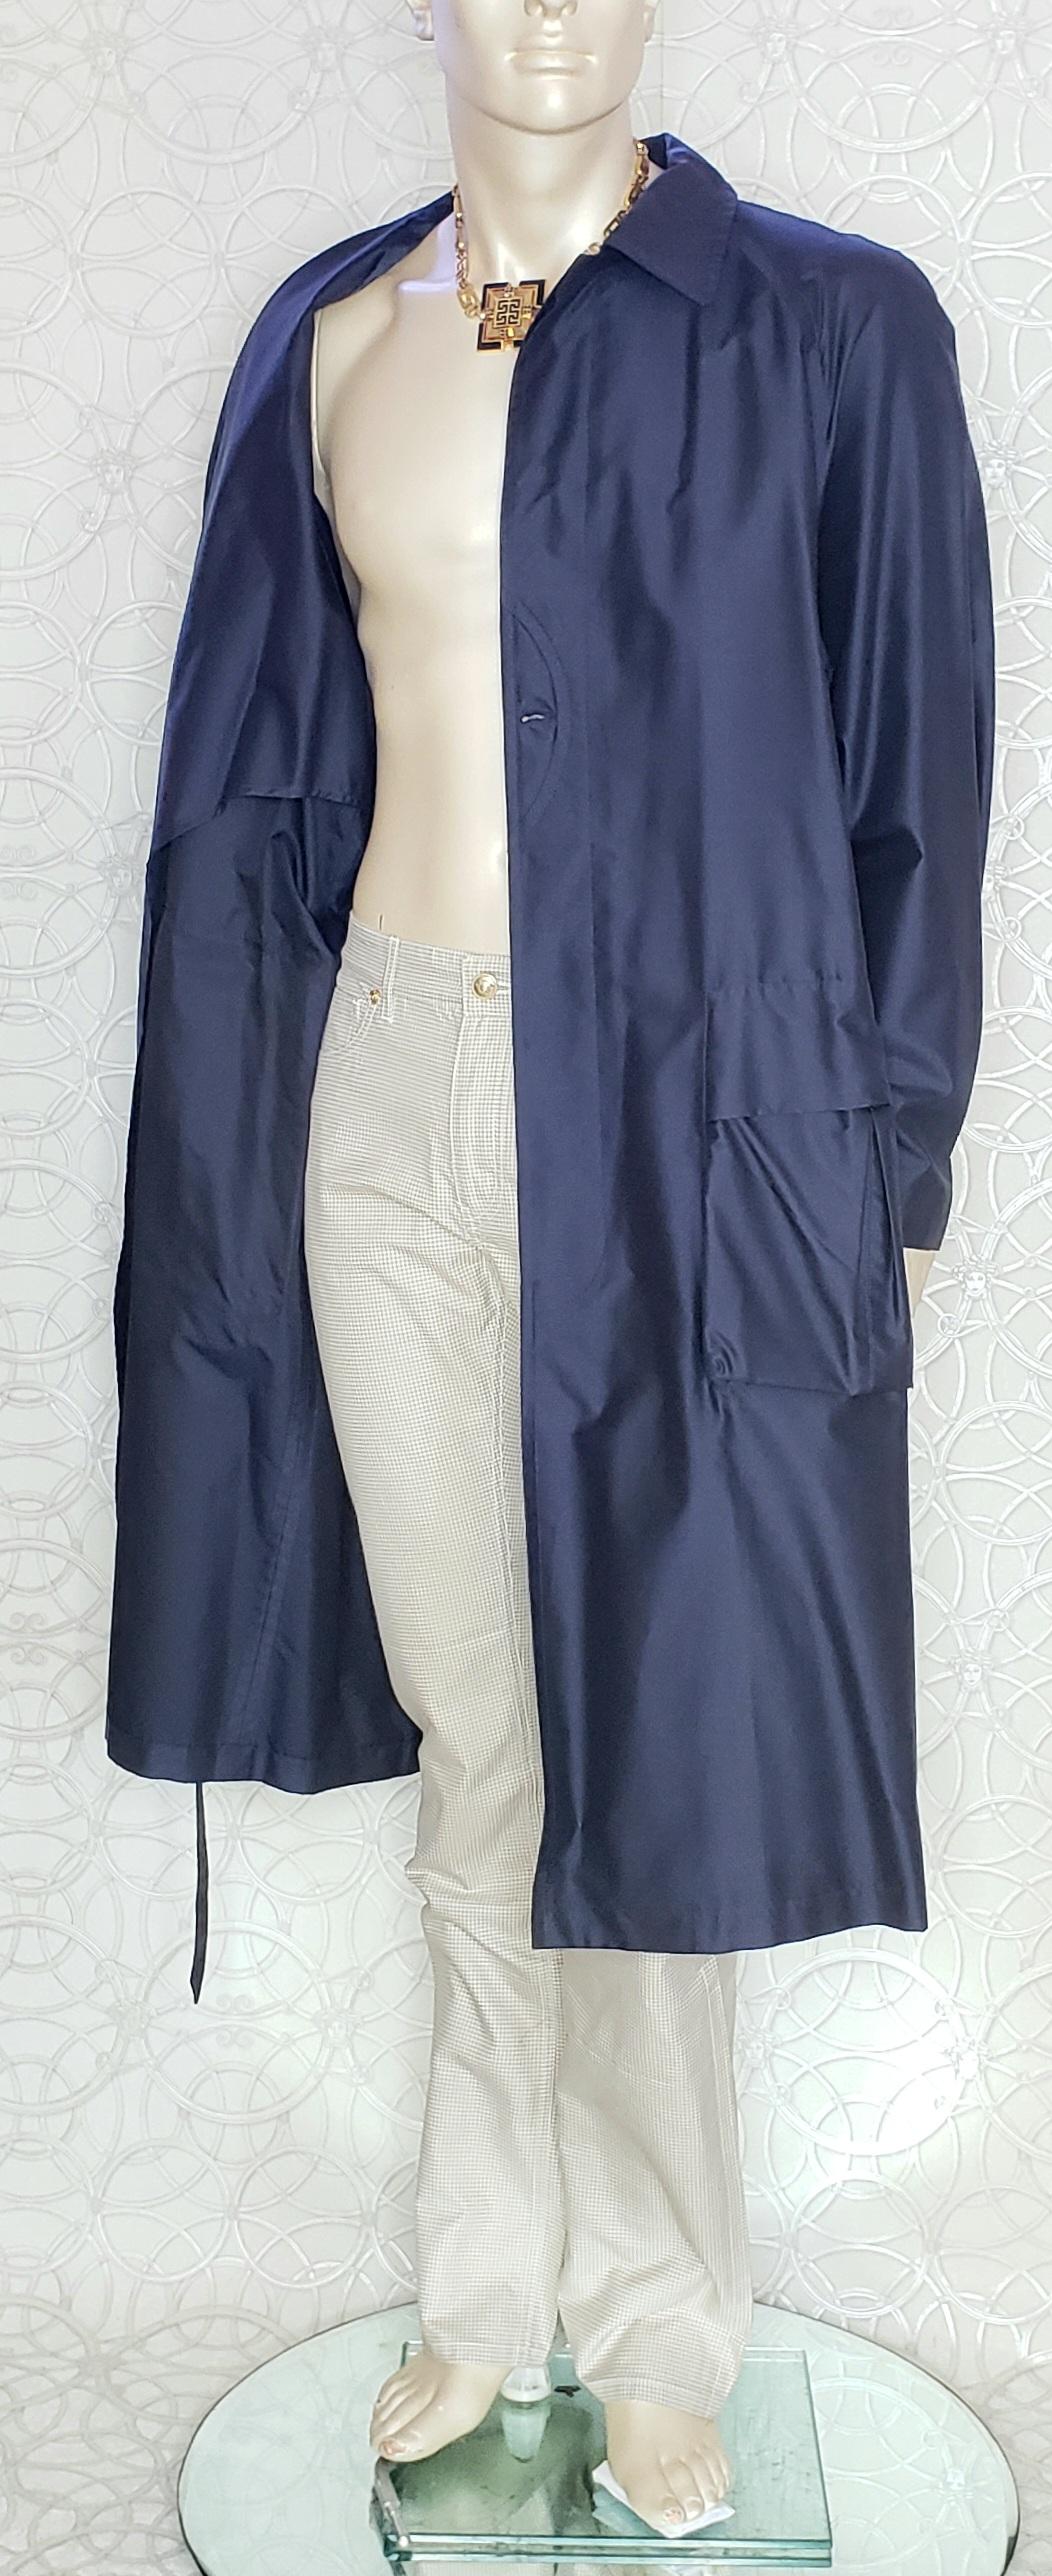 S/S 2016 Look # 34 VERSACE BELTED NAVY BLUE TRENCH SILK COAT 50 - 40 For Sale 5